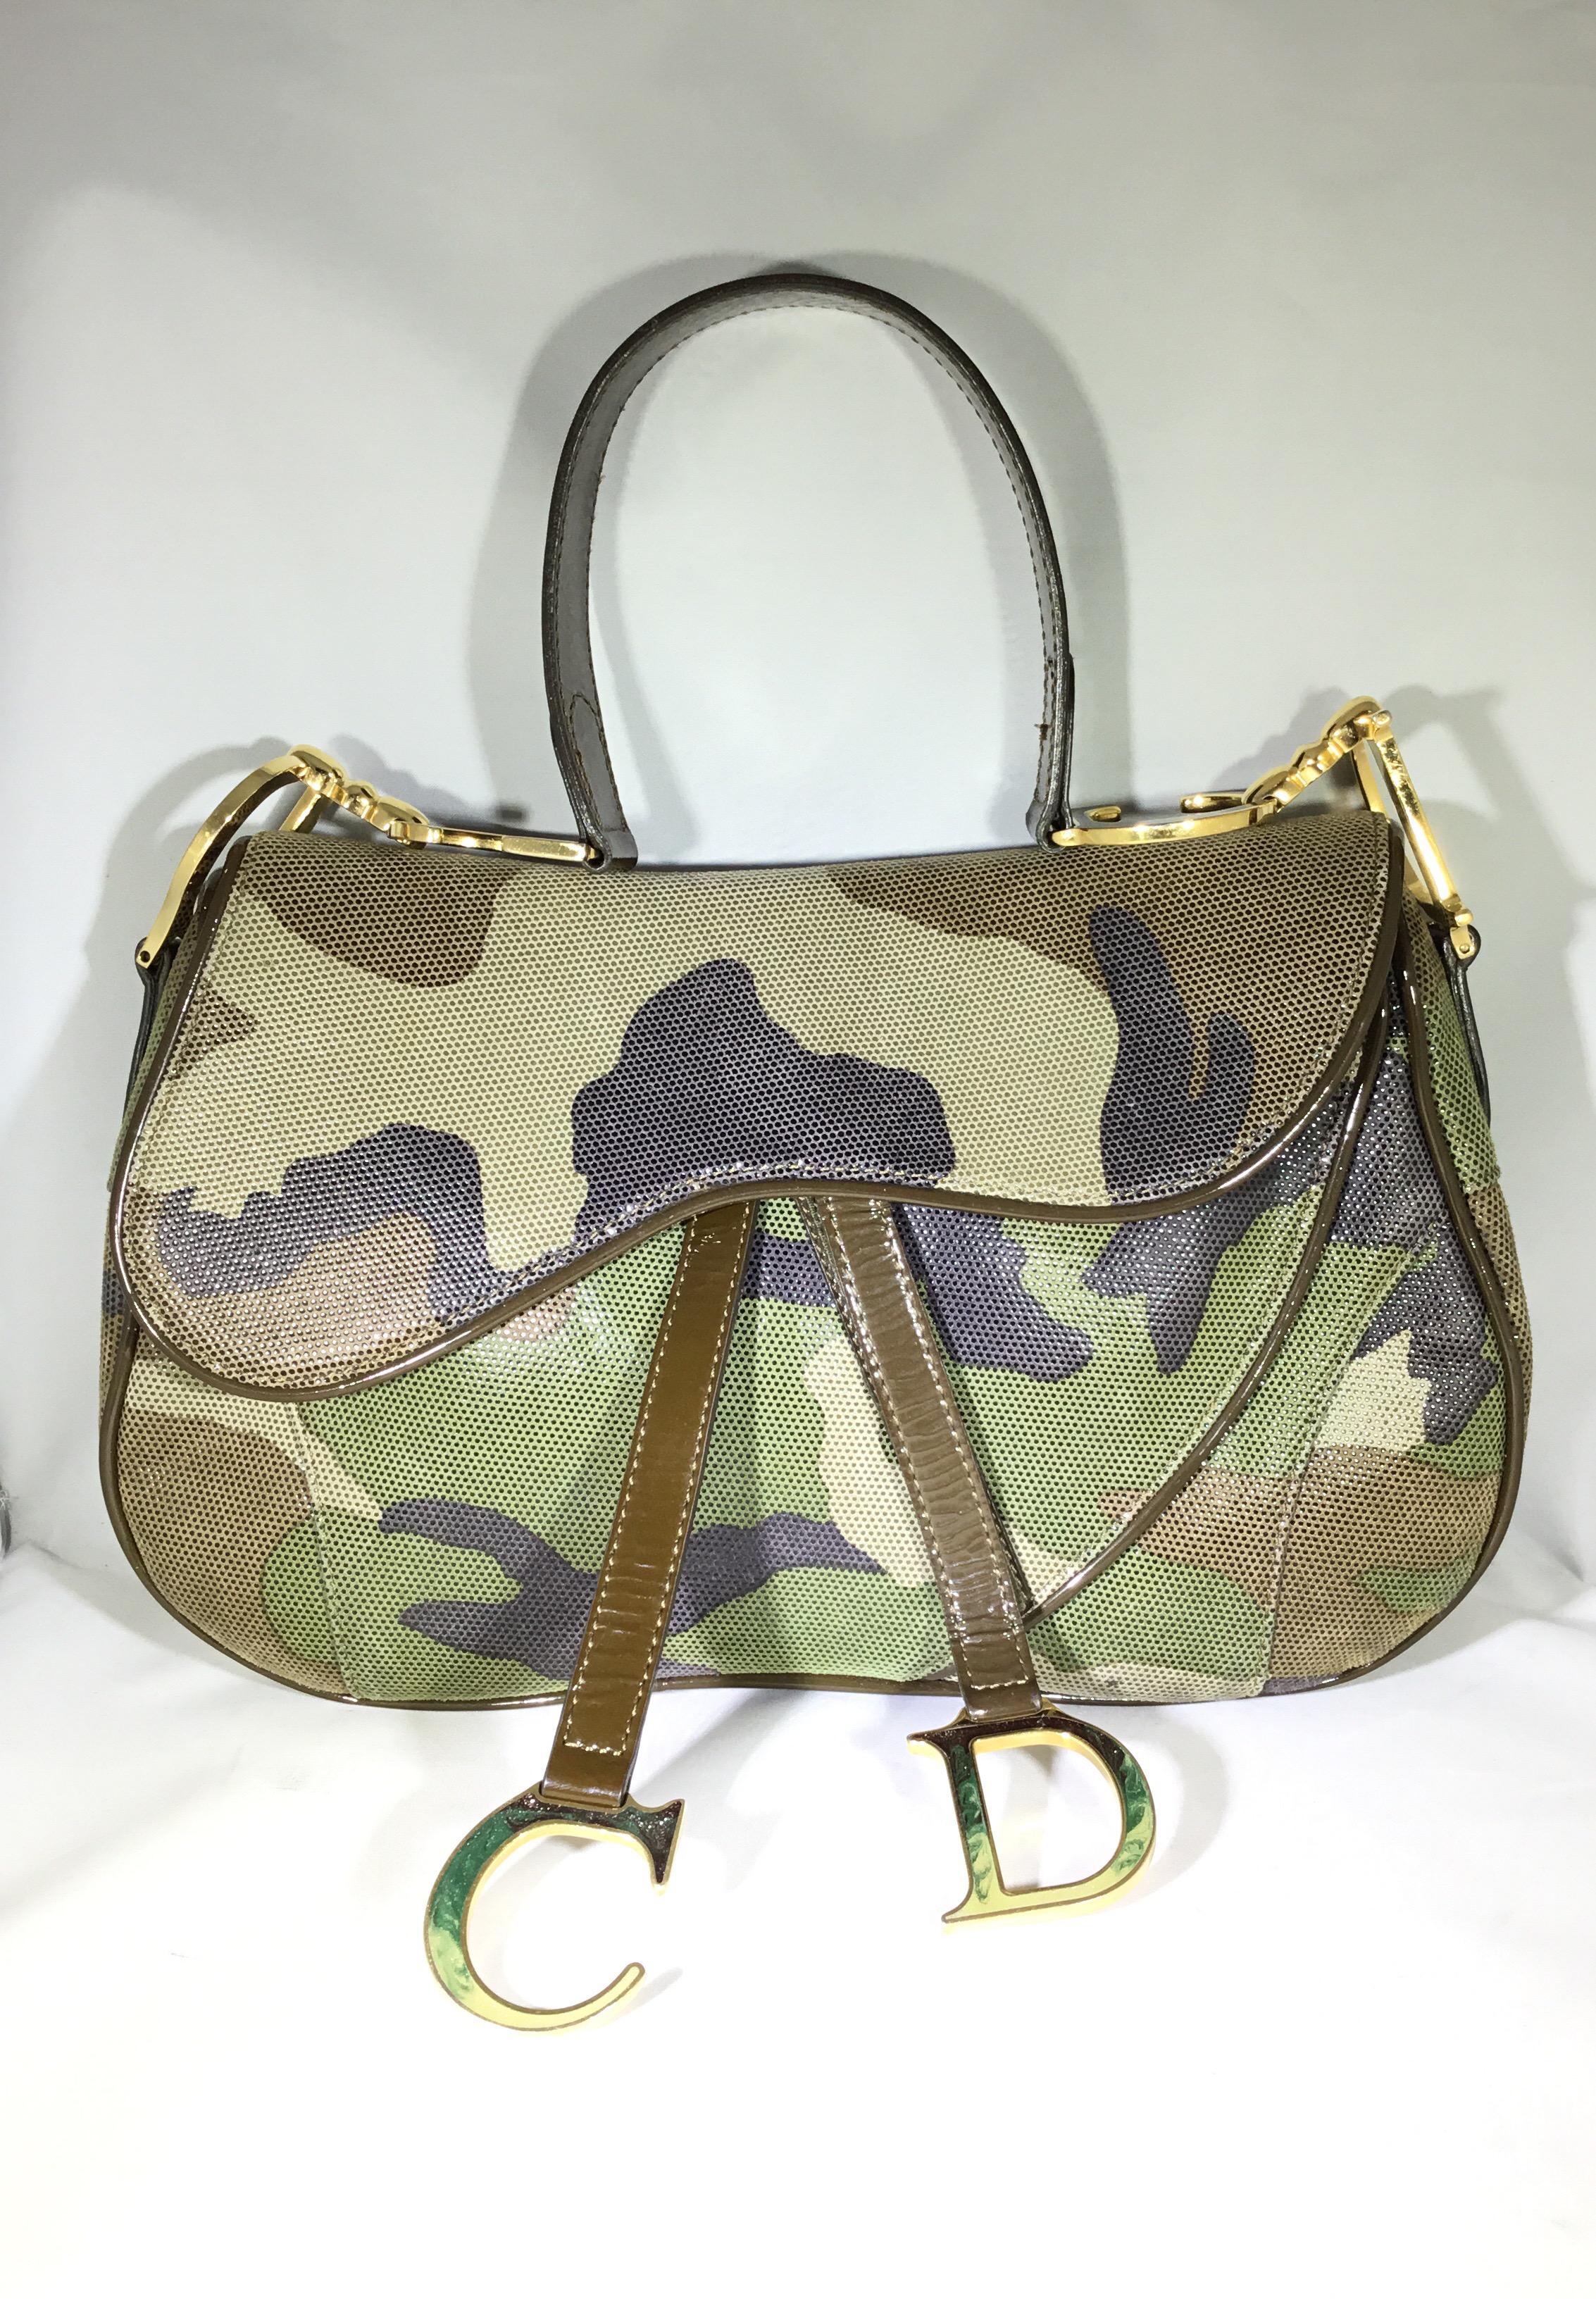 Christian Dior camouflage saddle shoulder bag has gold-tone hardware throughout, bag is made with a perforated suede atop a patent base with patent piping and shoulder strap. Velcro strap closure with a “CD” metal initial detail. Nylon lining with